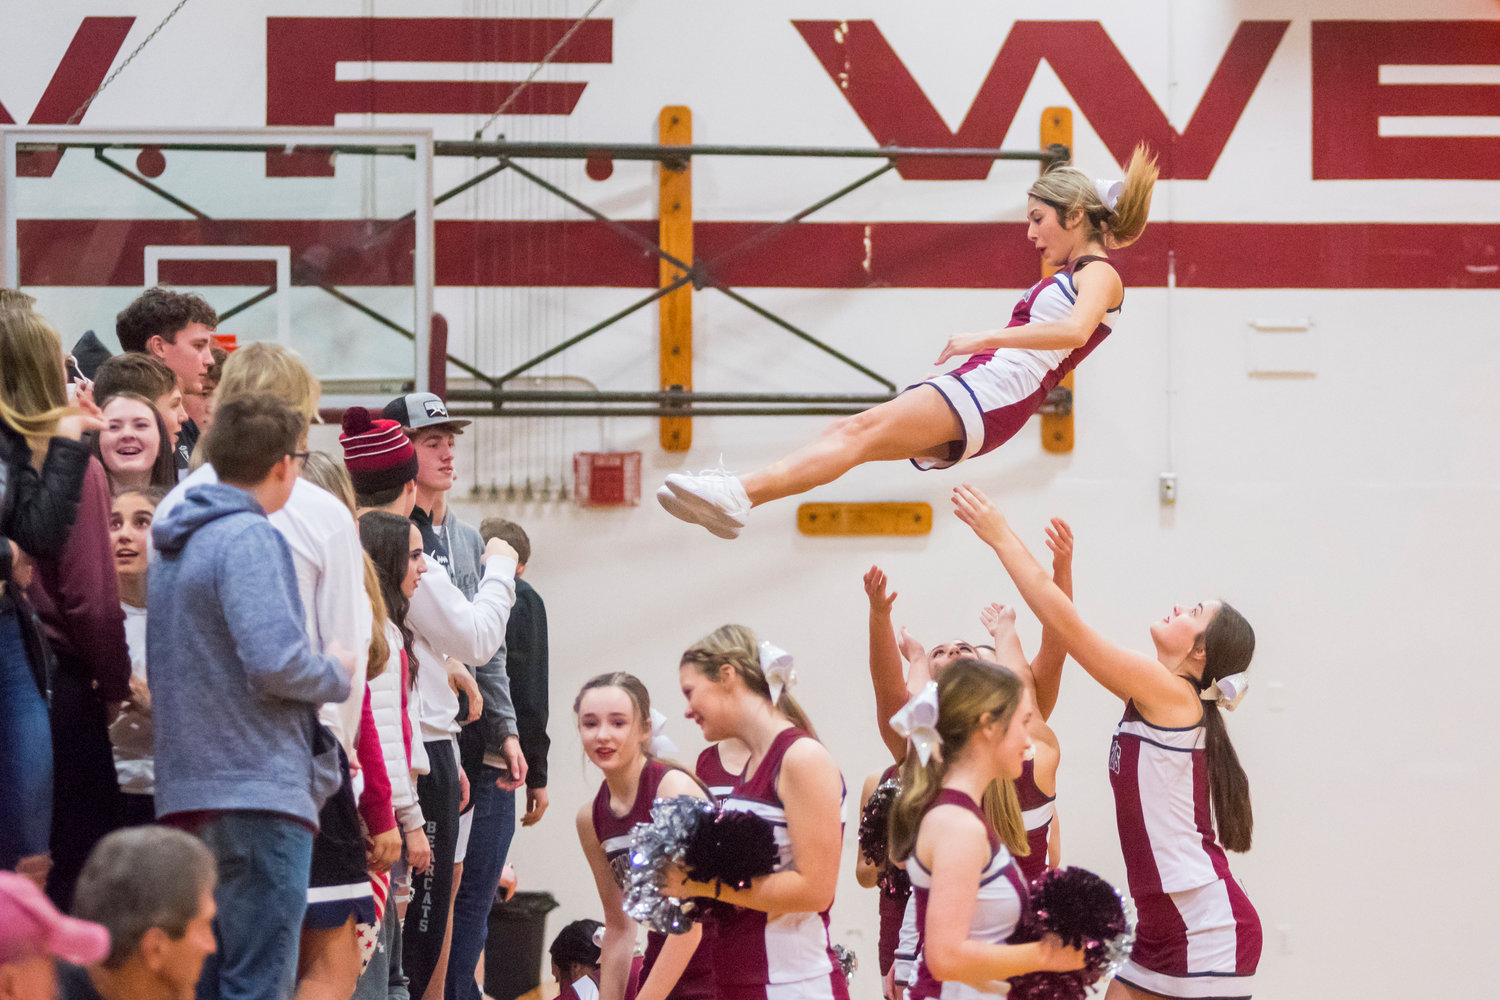 Images from an Evergreen 2A girls basketball game between W.F. West and Rochester played Tuesday night in Chehalis.